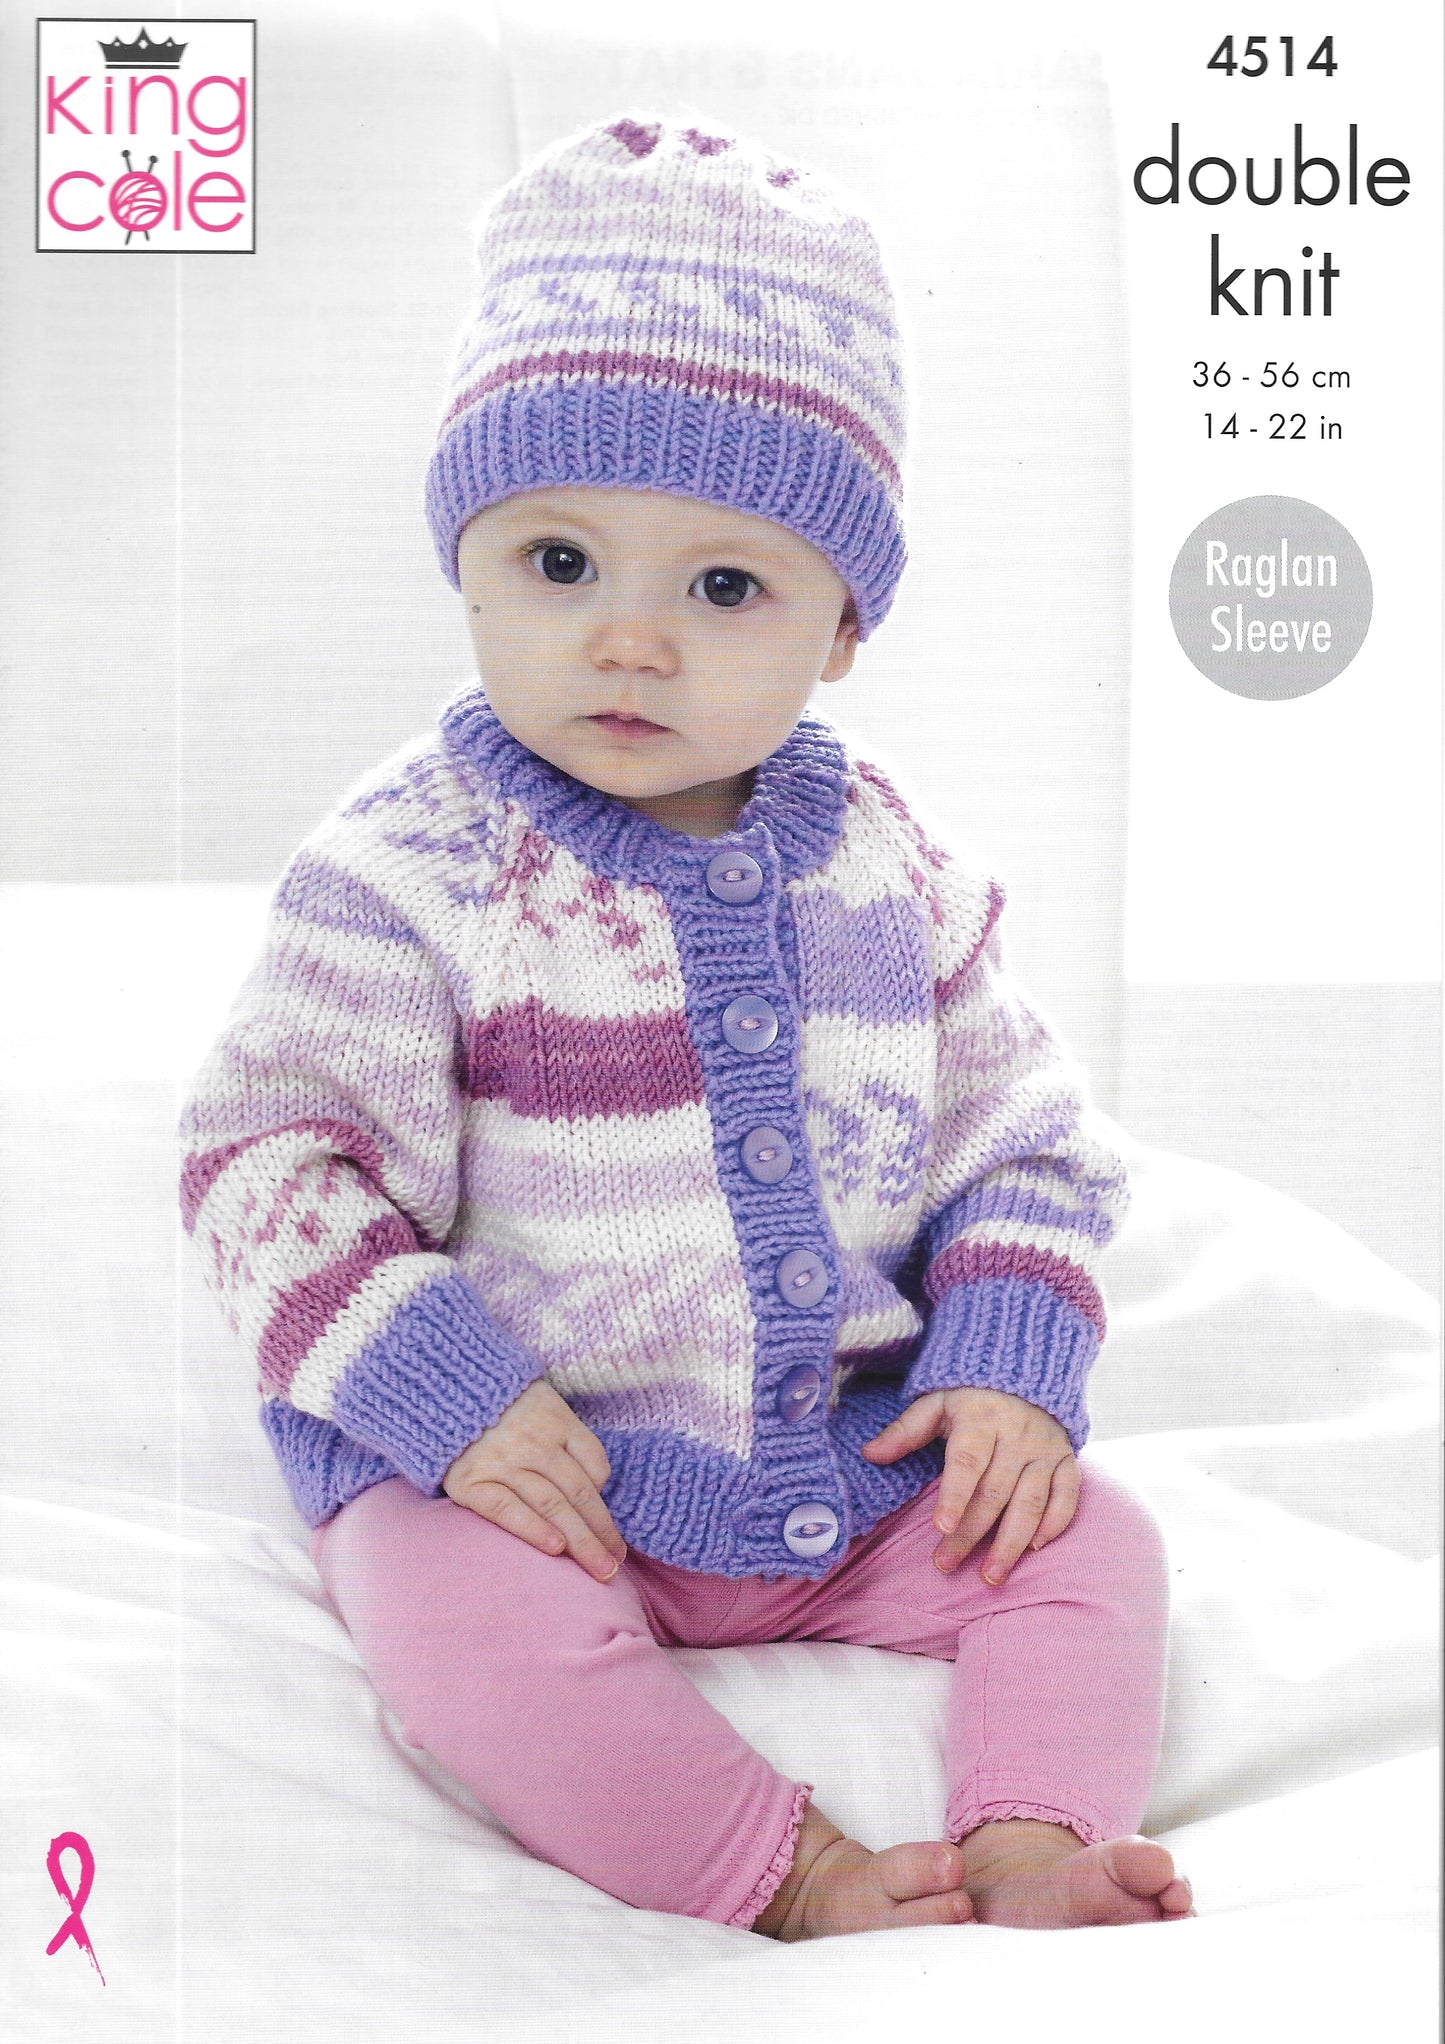 4514 King Cole Knitting Pattern. Baby Cardigans and hat. Double Knit